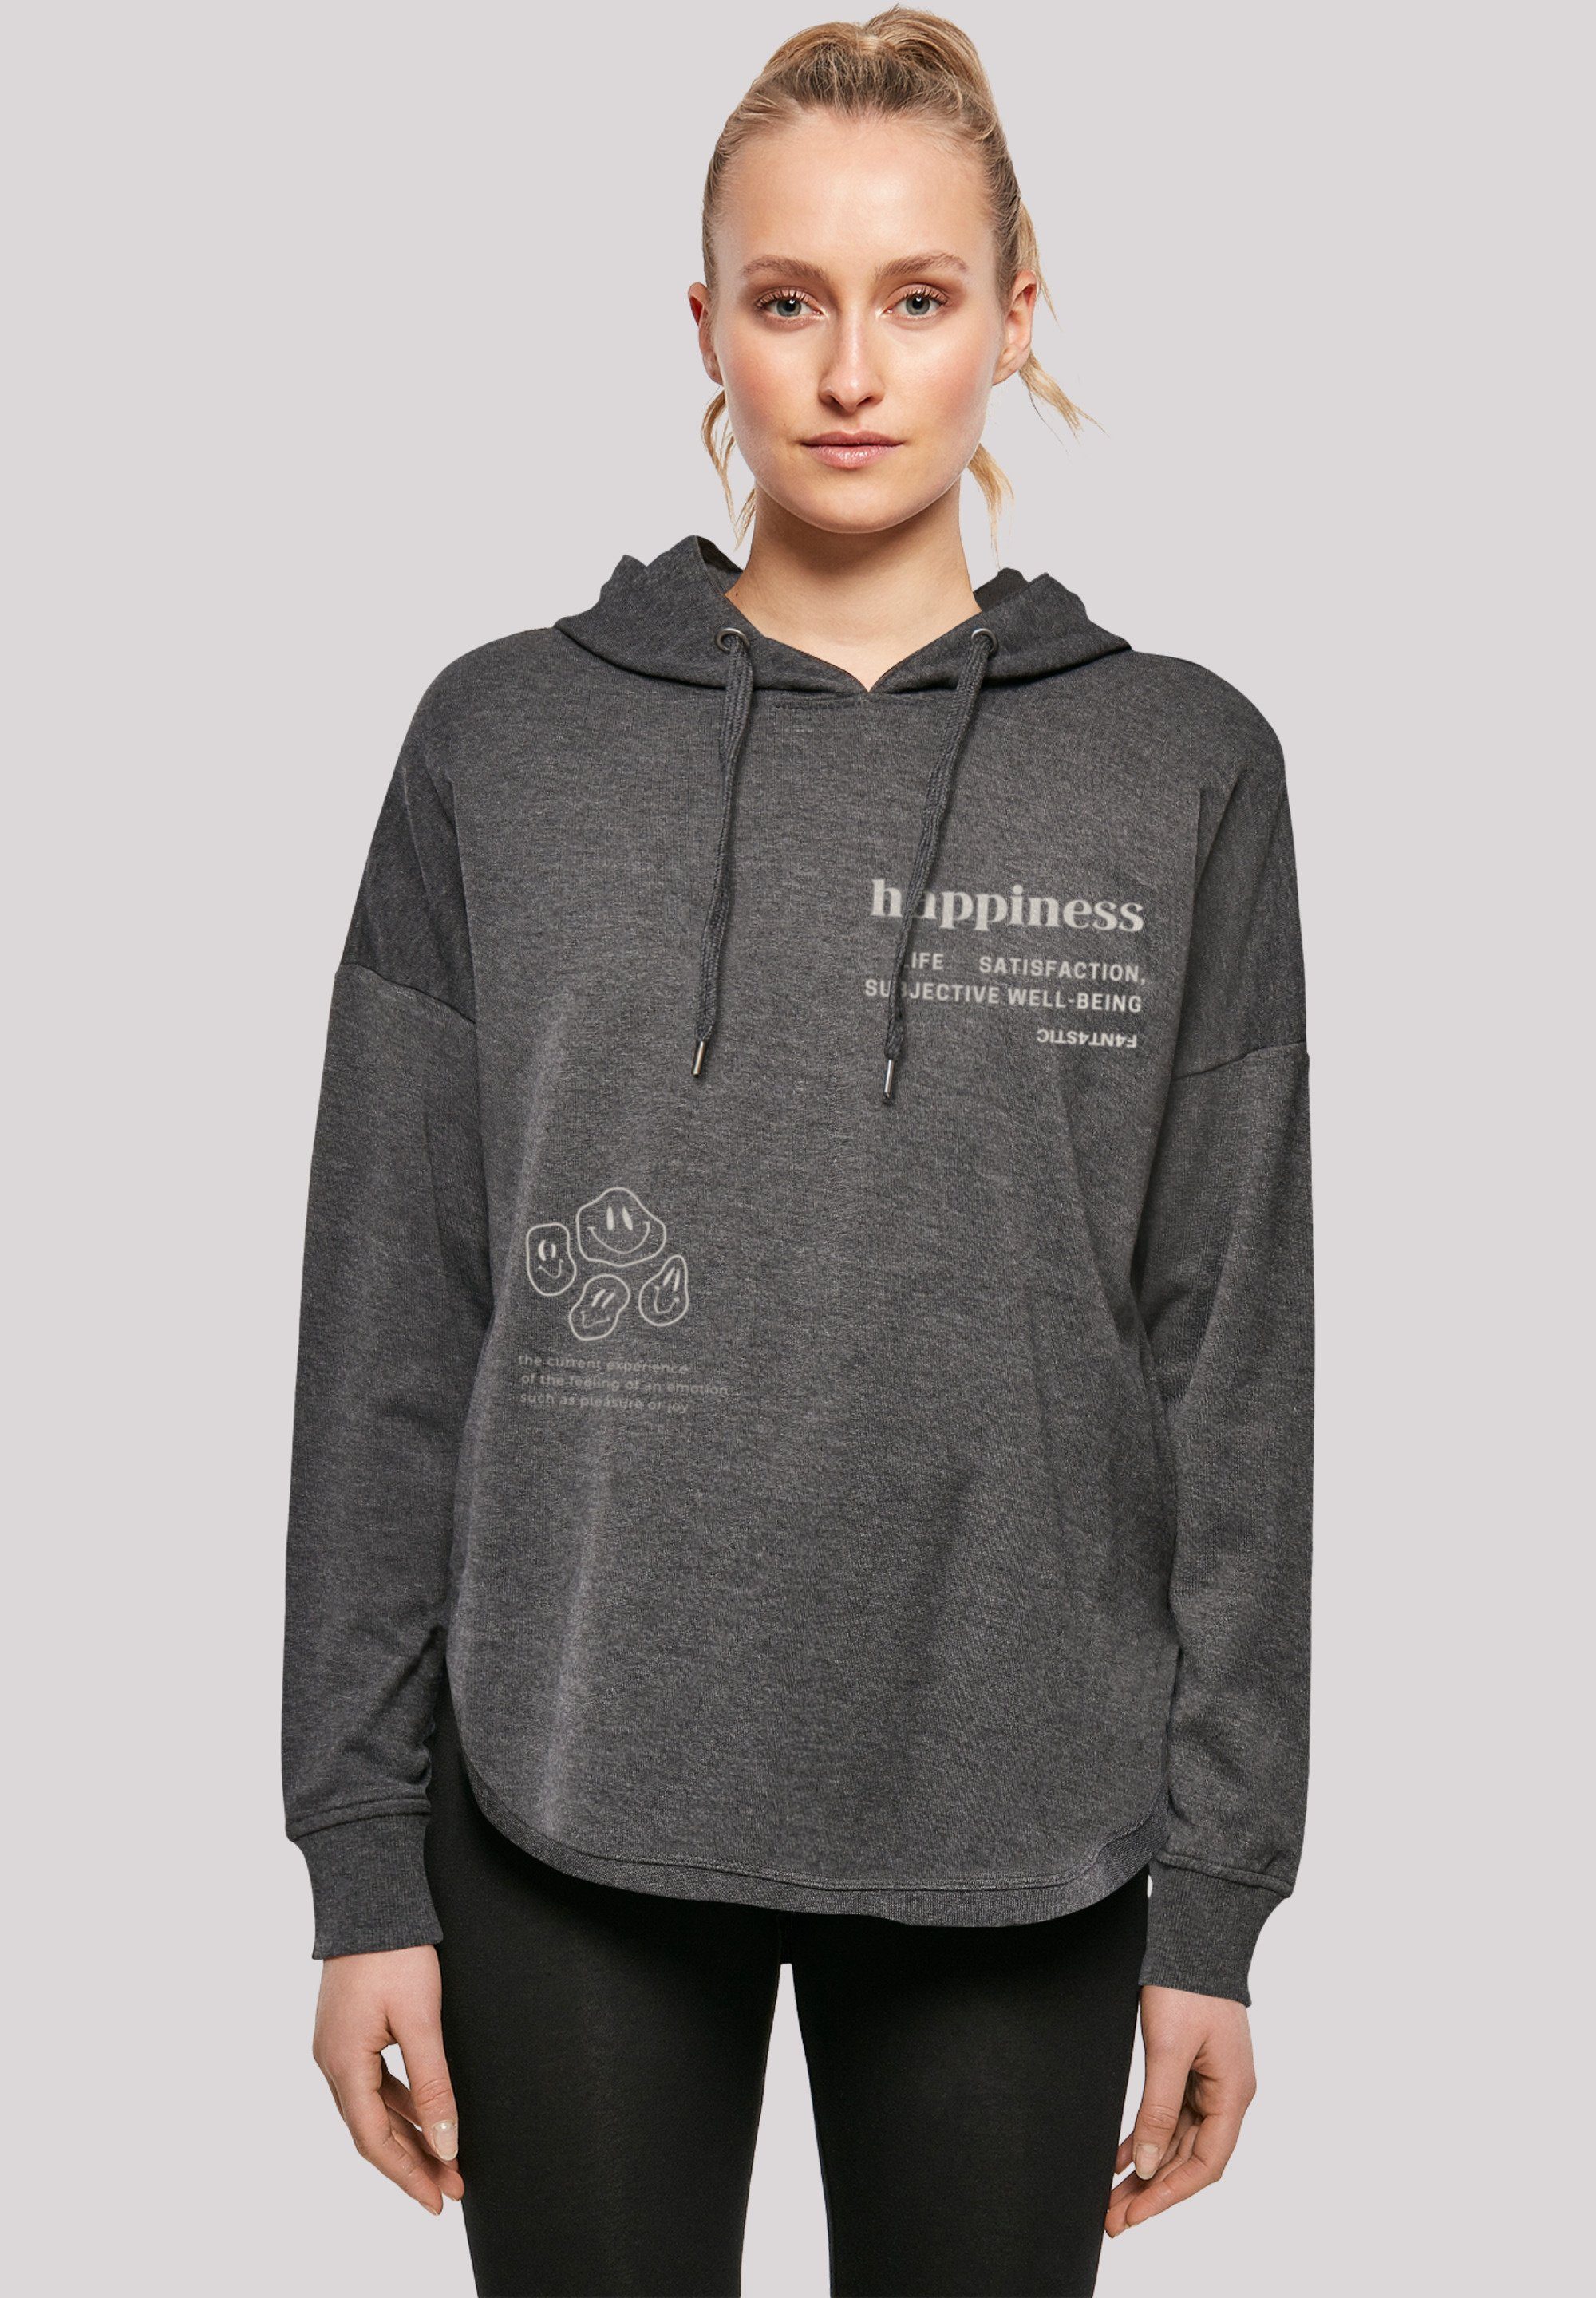 Kapuzenpullover HOODIE F4NT4STIC charcoal Print OVERSIZE happiness